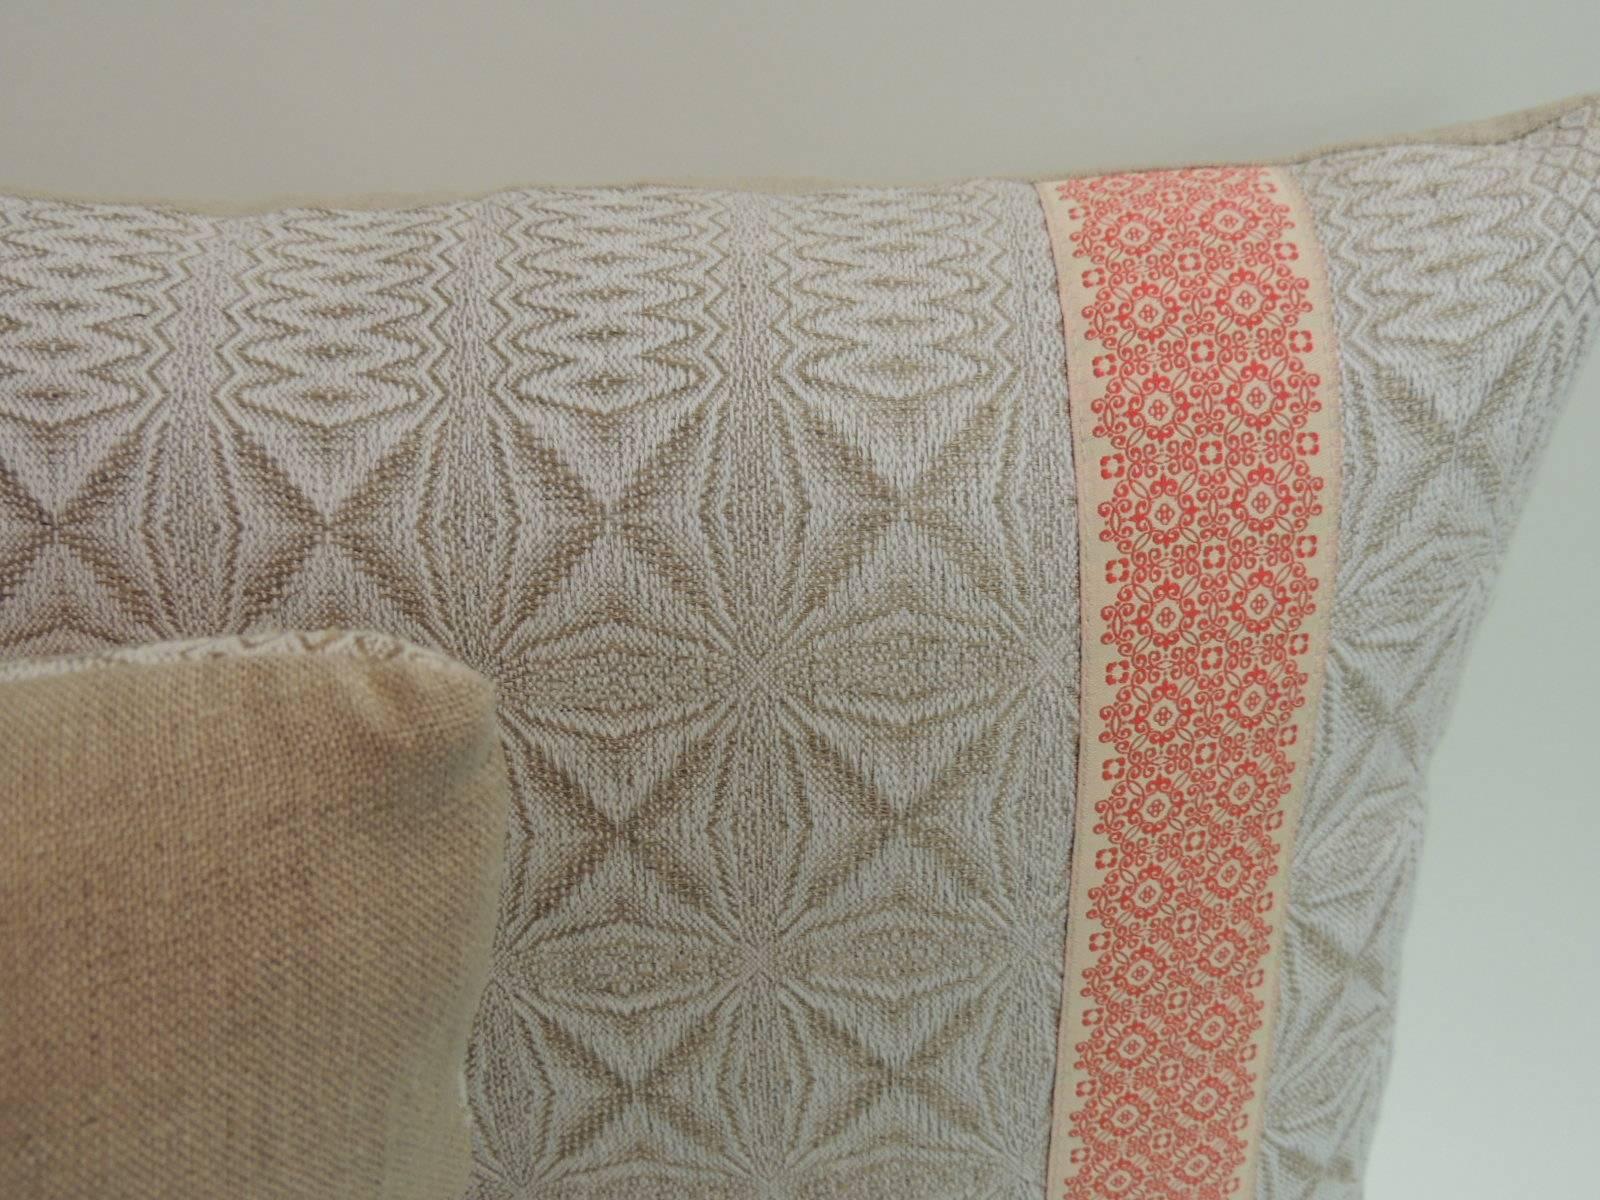 Pair of Vintage Woven Swedish Decorative Pillows with Ribbon Accents In Good Condition For Sale In Oakland Park, FL